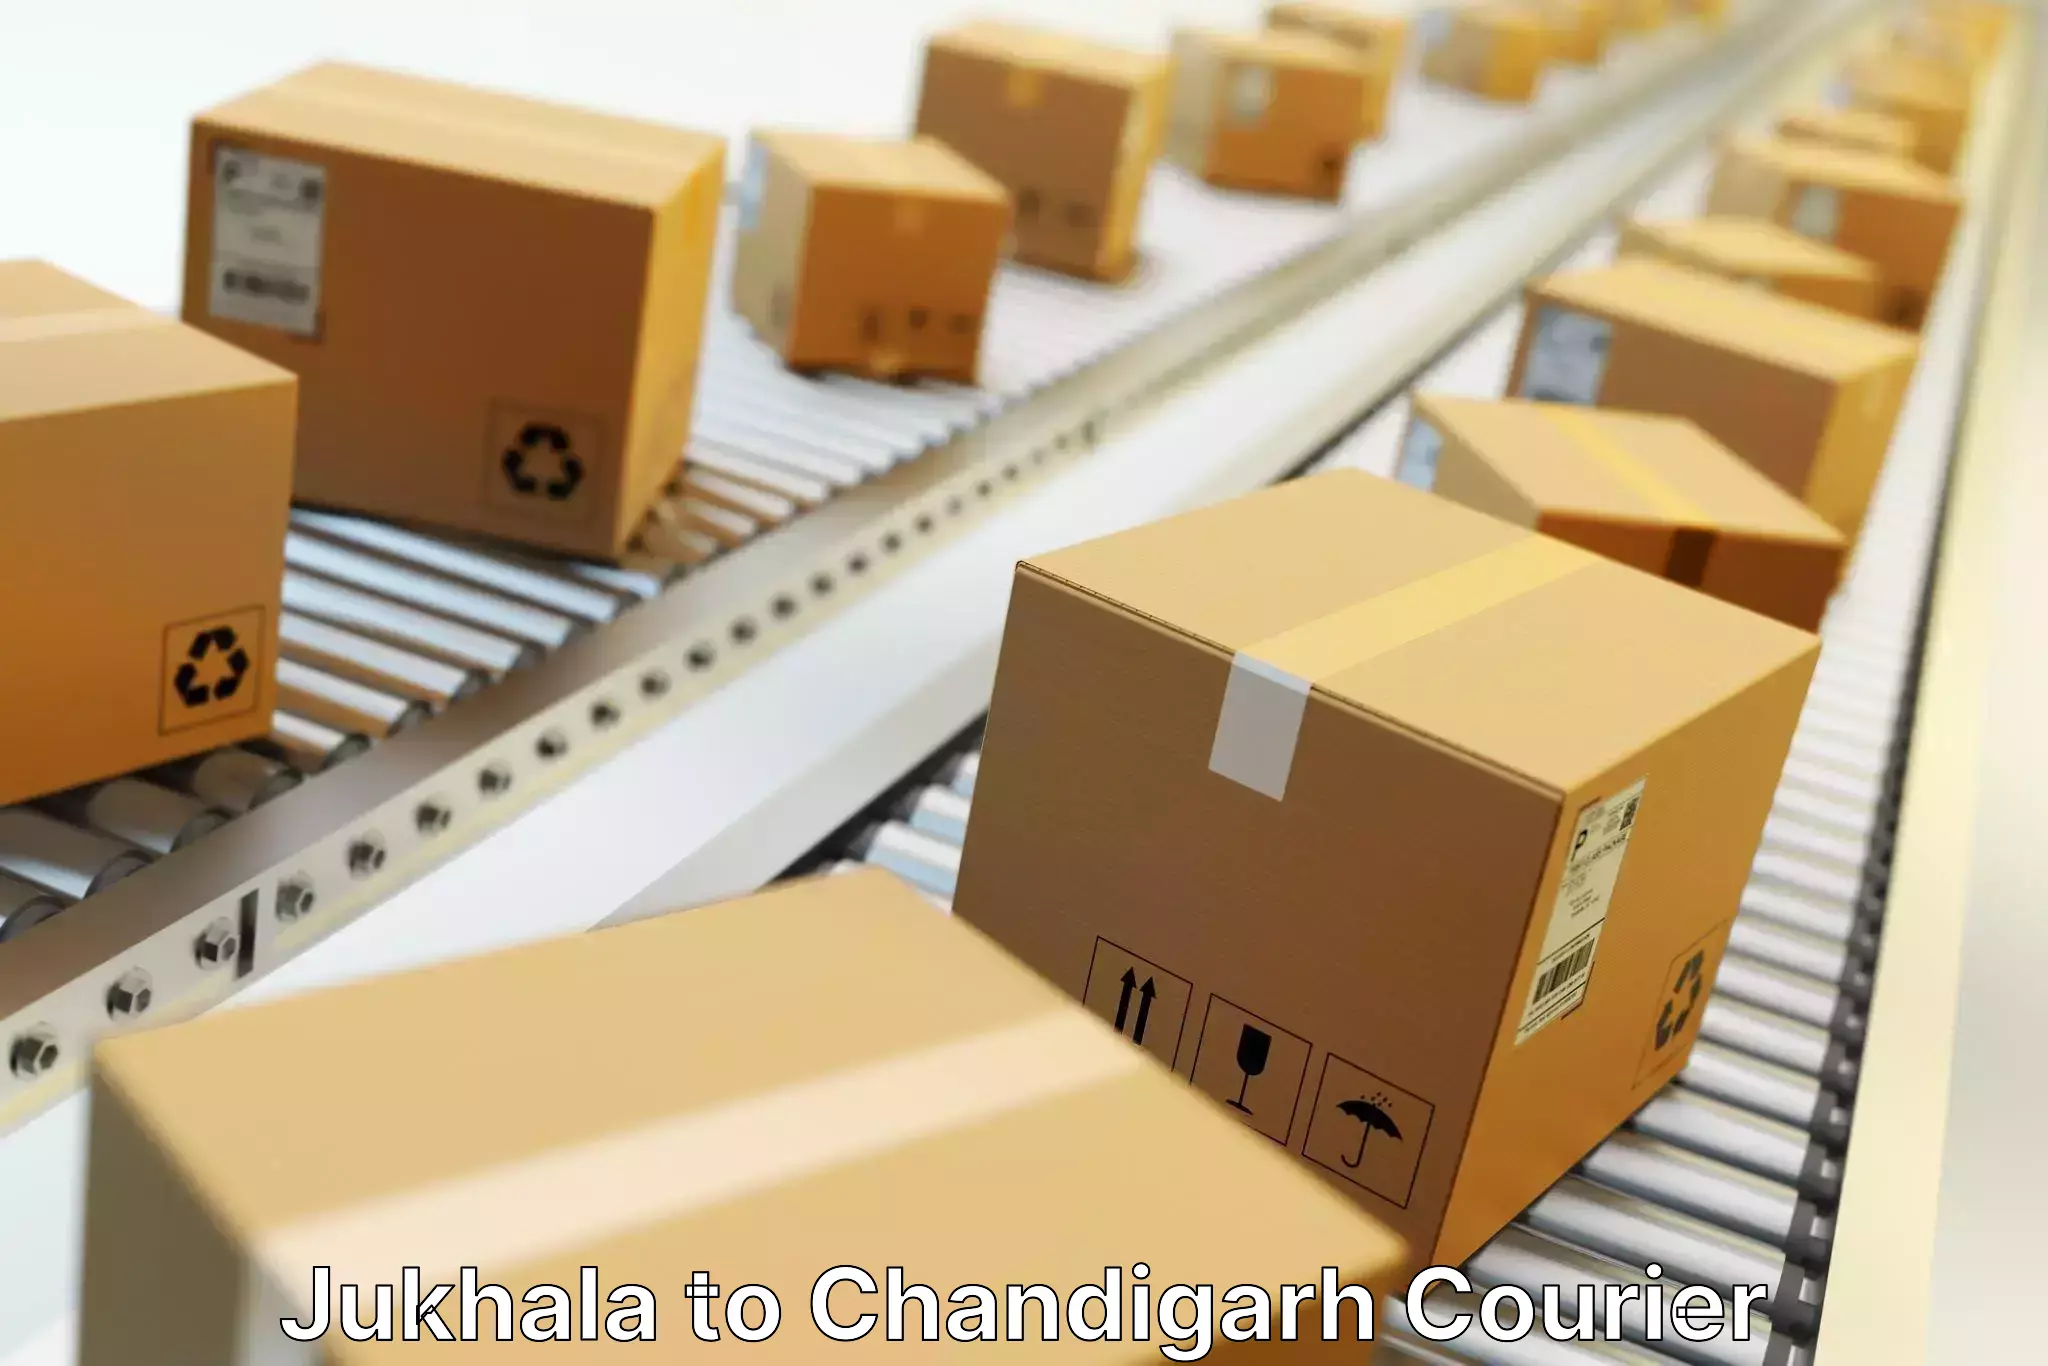 Global delivery options in Jukhala to Chandigarh